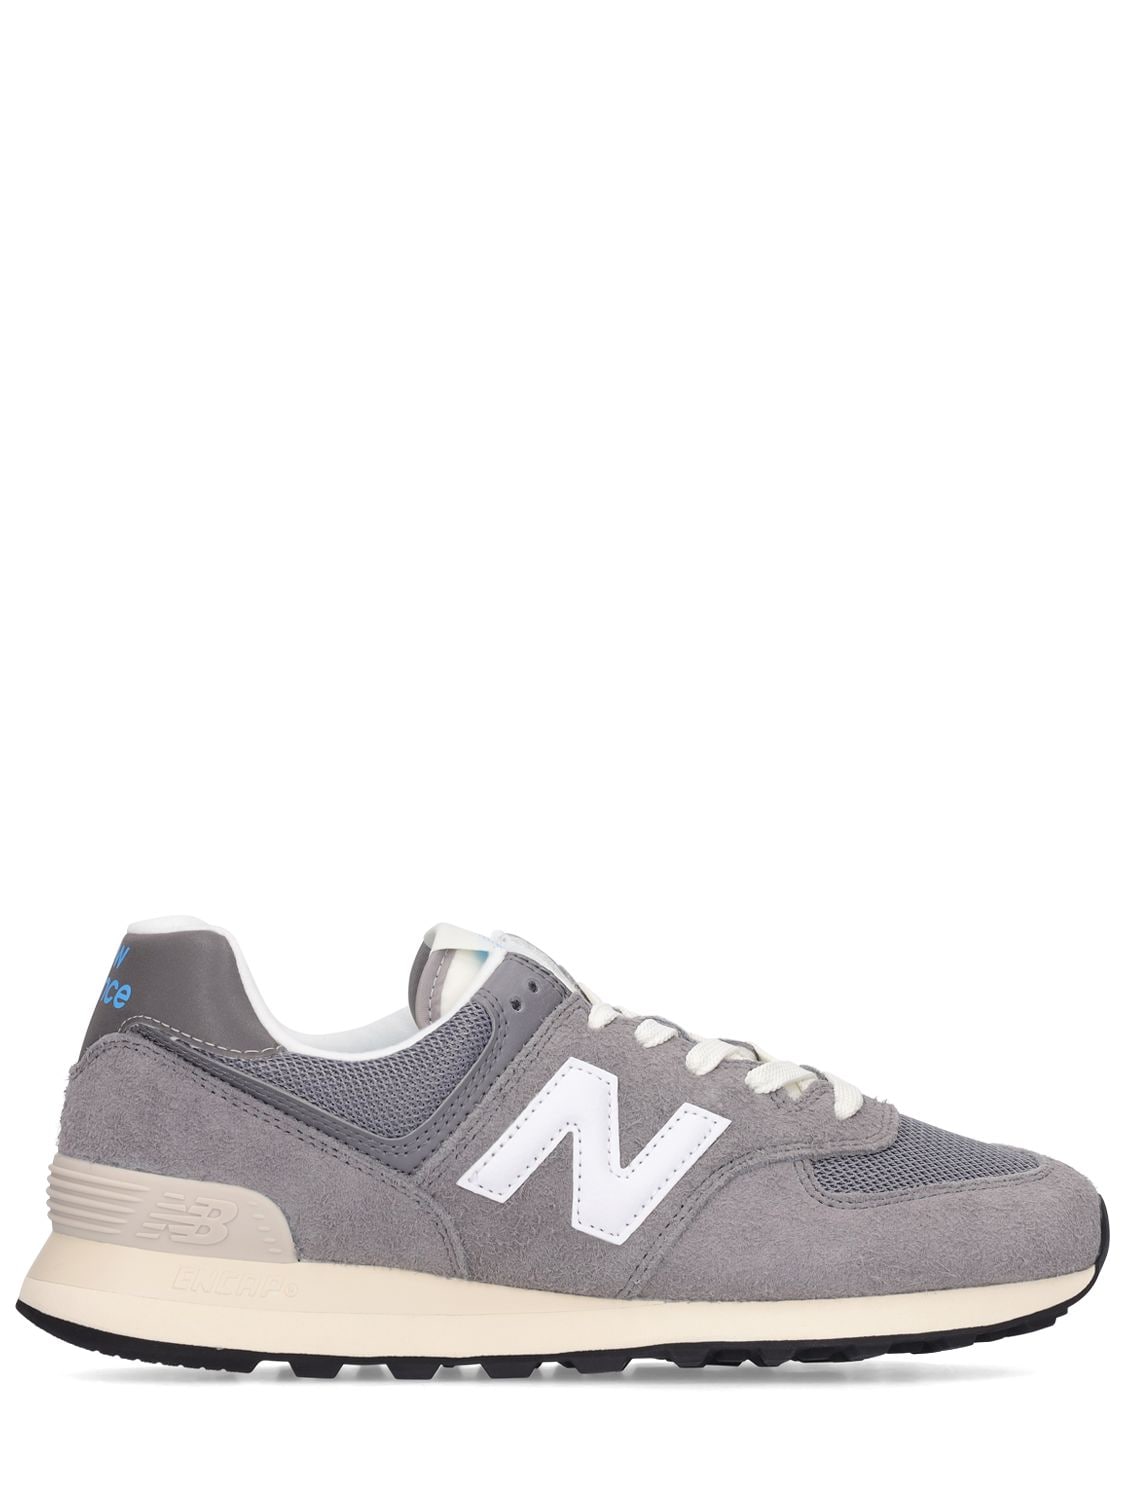 NEW BALANCE 574 Sneakers